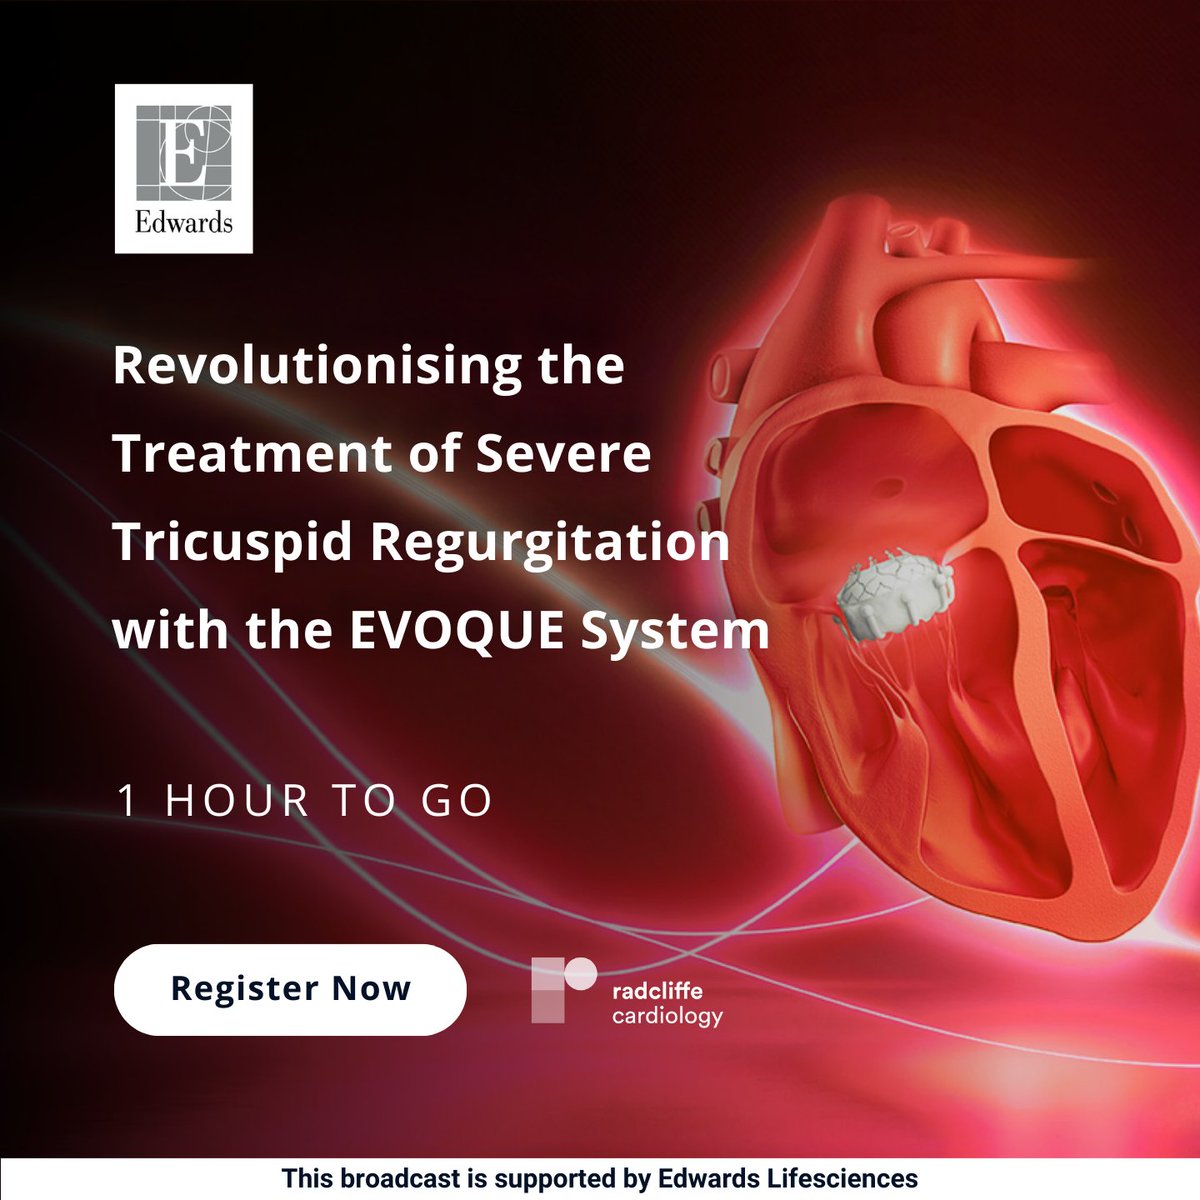 ⏰ 1 HOUR TO GO ⏰ Revolutionising the Treatment of Severe #Tricuspid Regurgitation with the #EVOQUE System 🔗 ow.ly/UbWP50Rg0fI 📚Patient selection criteria 📈The latest clinical evidence for #TTVR using the EVOQUE system 🏥Live imaging and procedure analysis using MPR